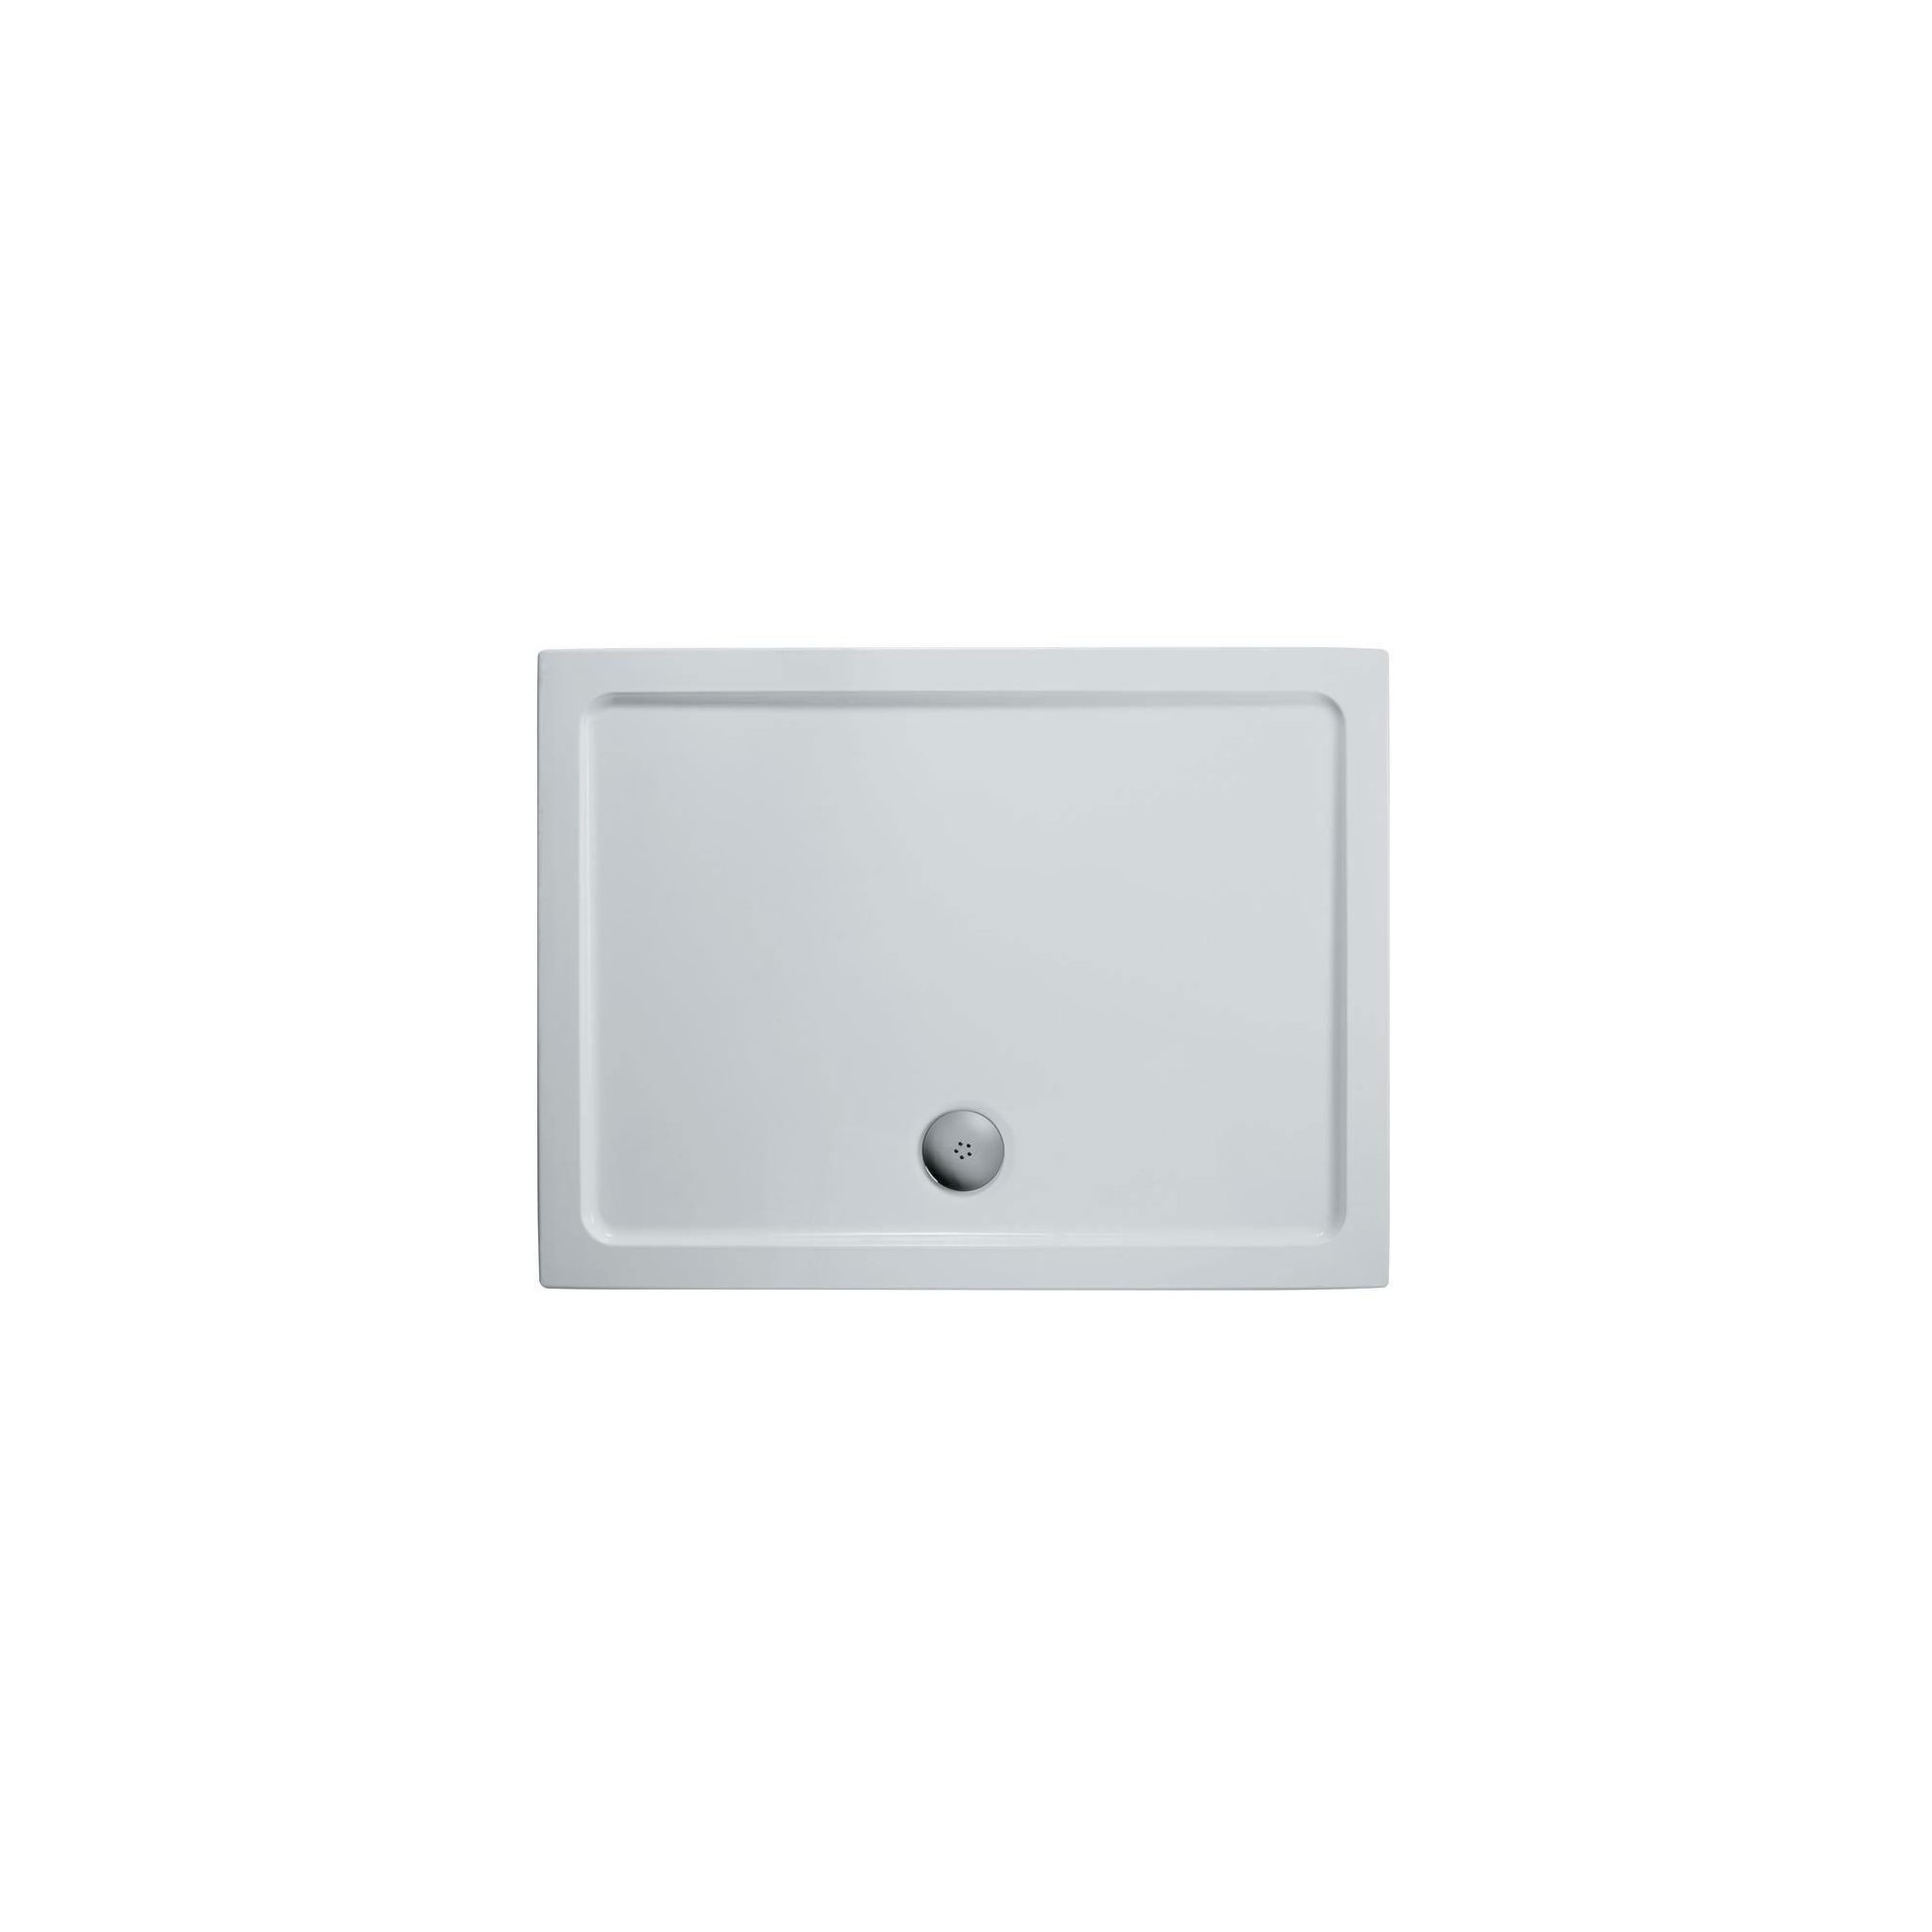 Ideal Standard Kubo Pivot Door Alcove Shower Enclosure, 900mm x 760mm, Bright Silver Frame, Low Profile Tray at Tesco Direct